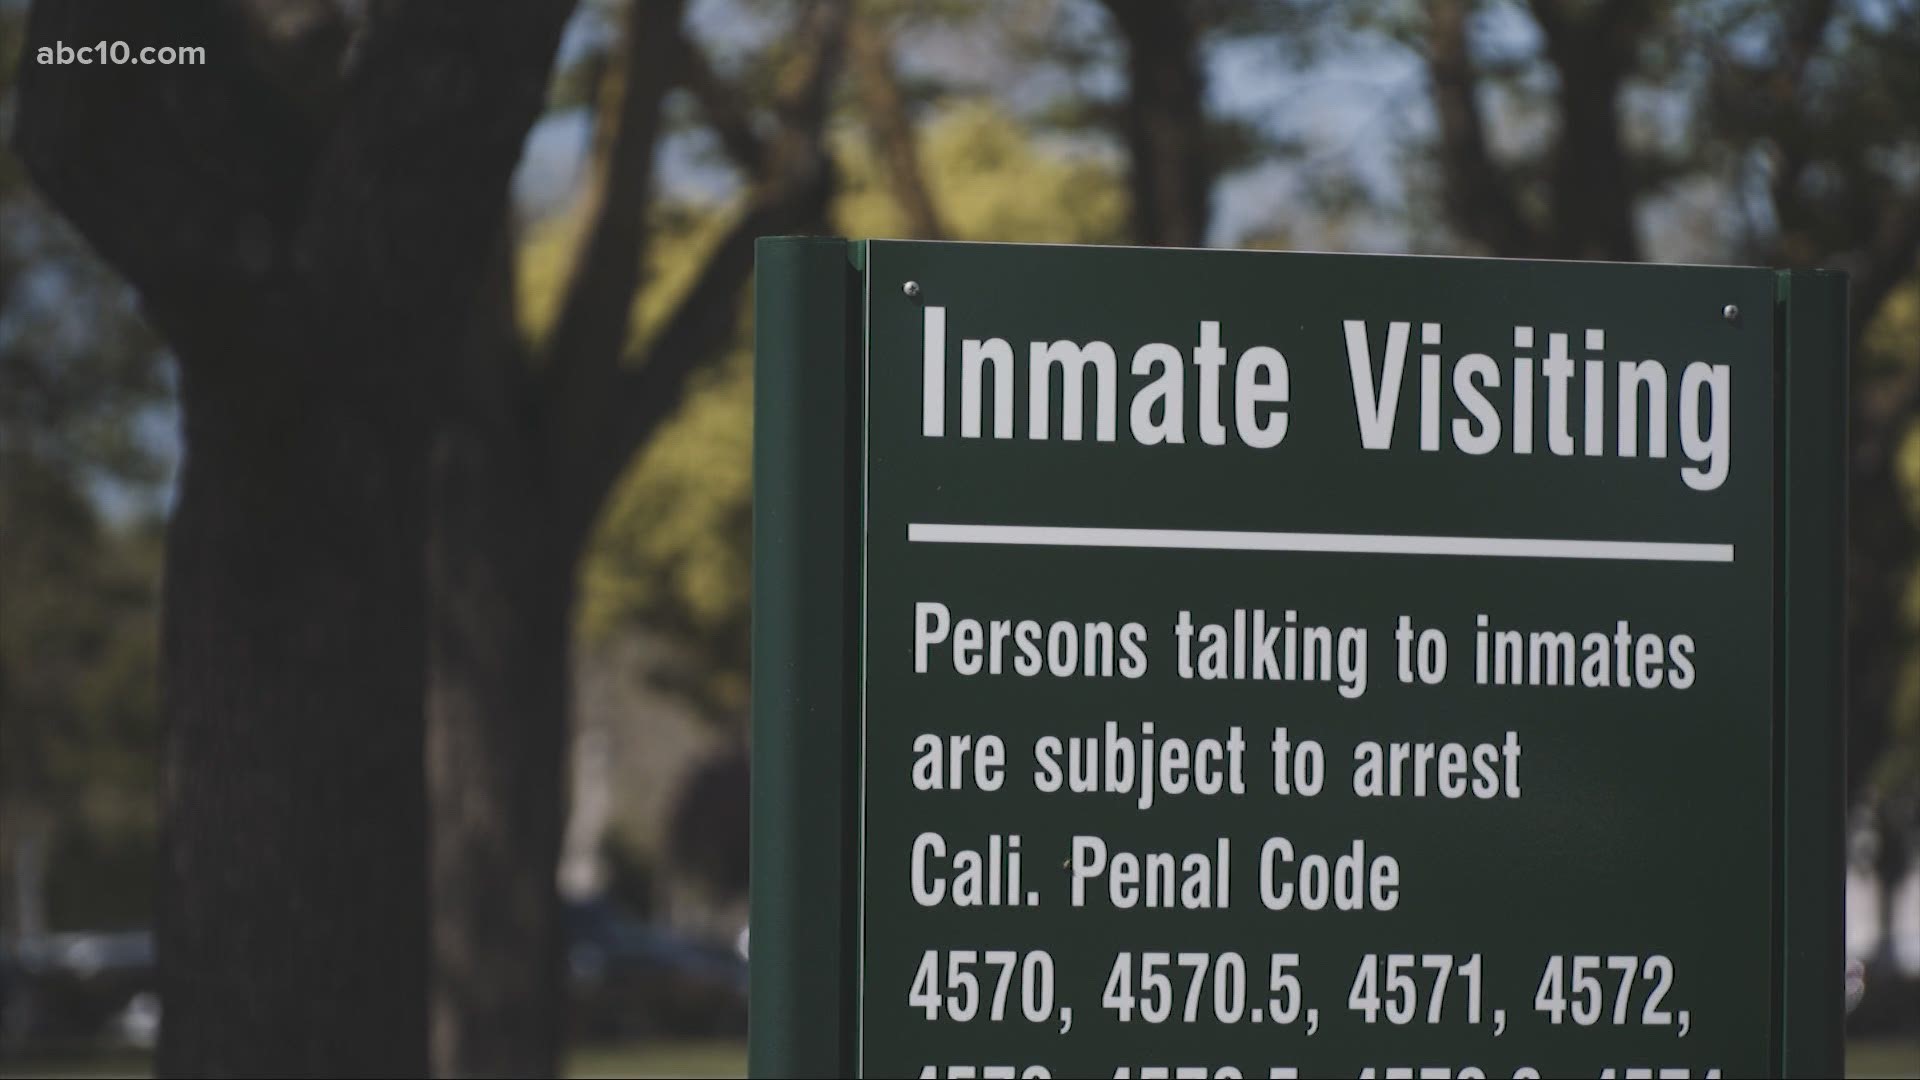 Inmates being released have only been charged with misdemeanor crimes.